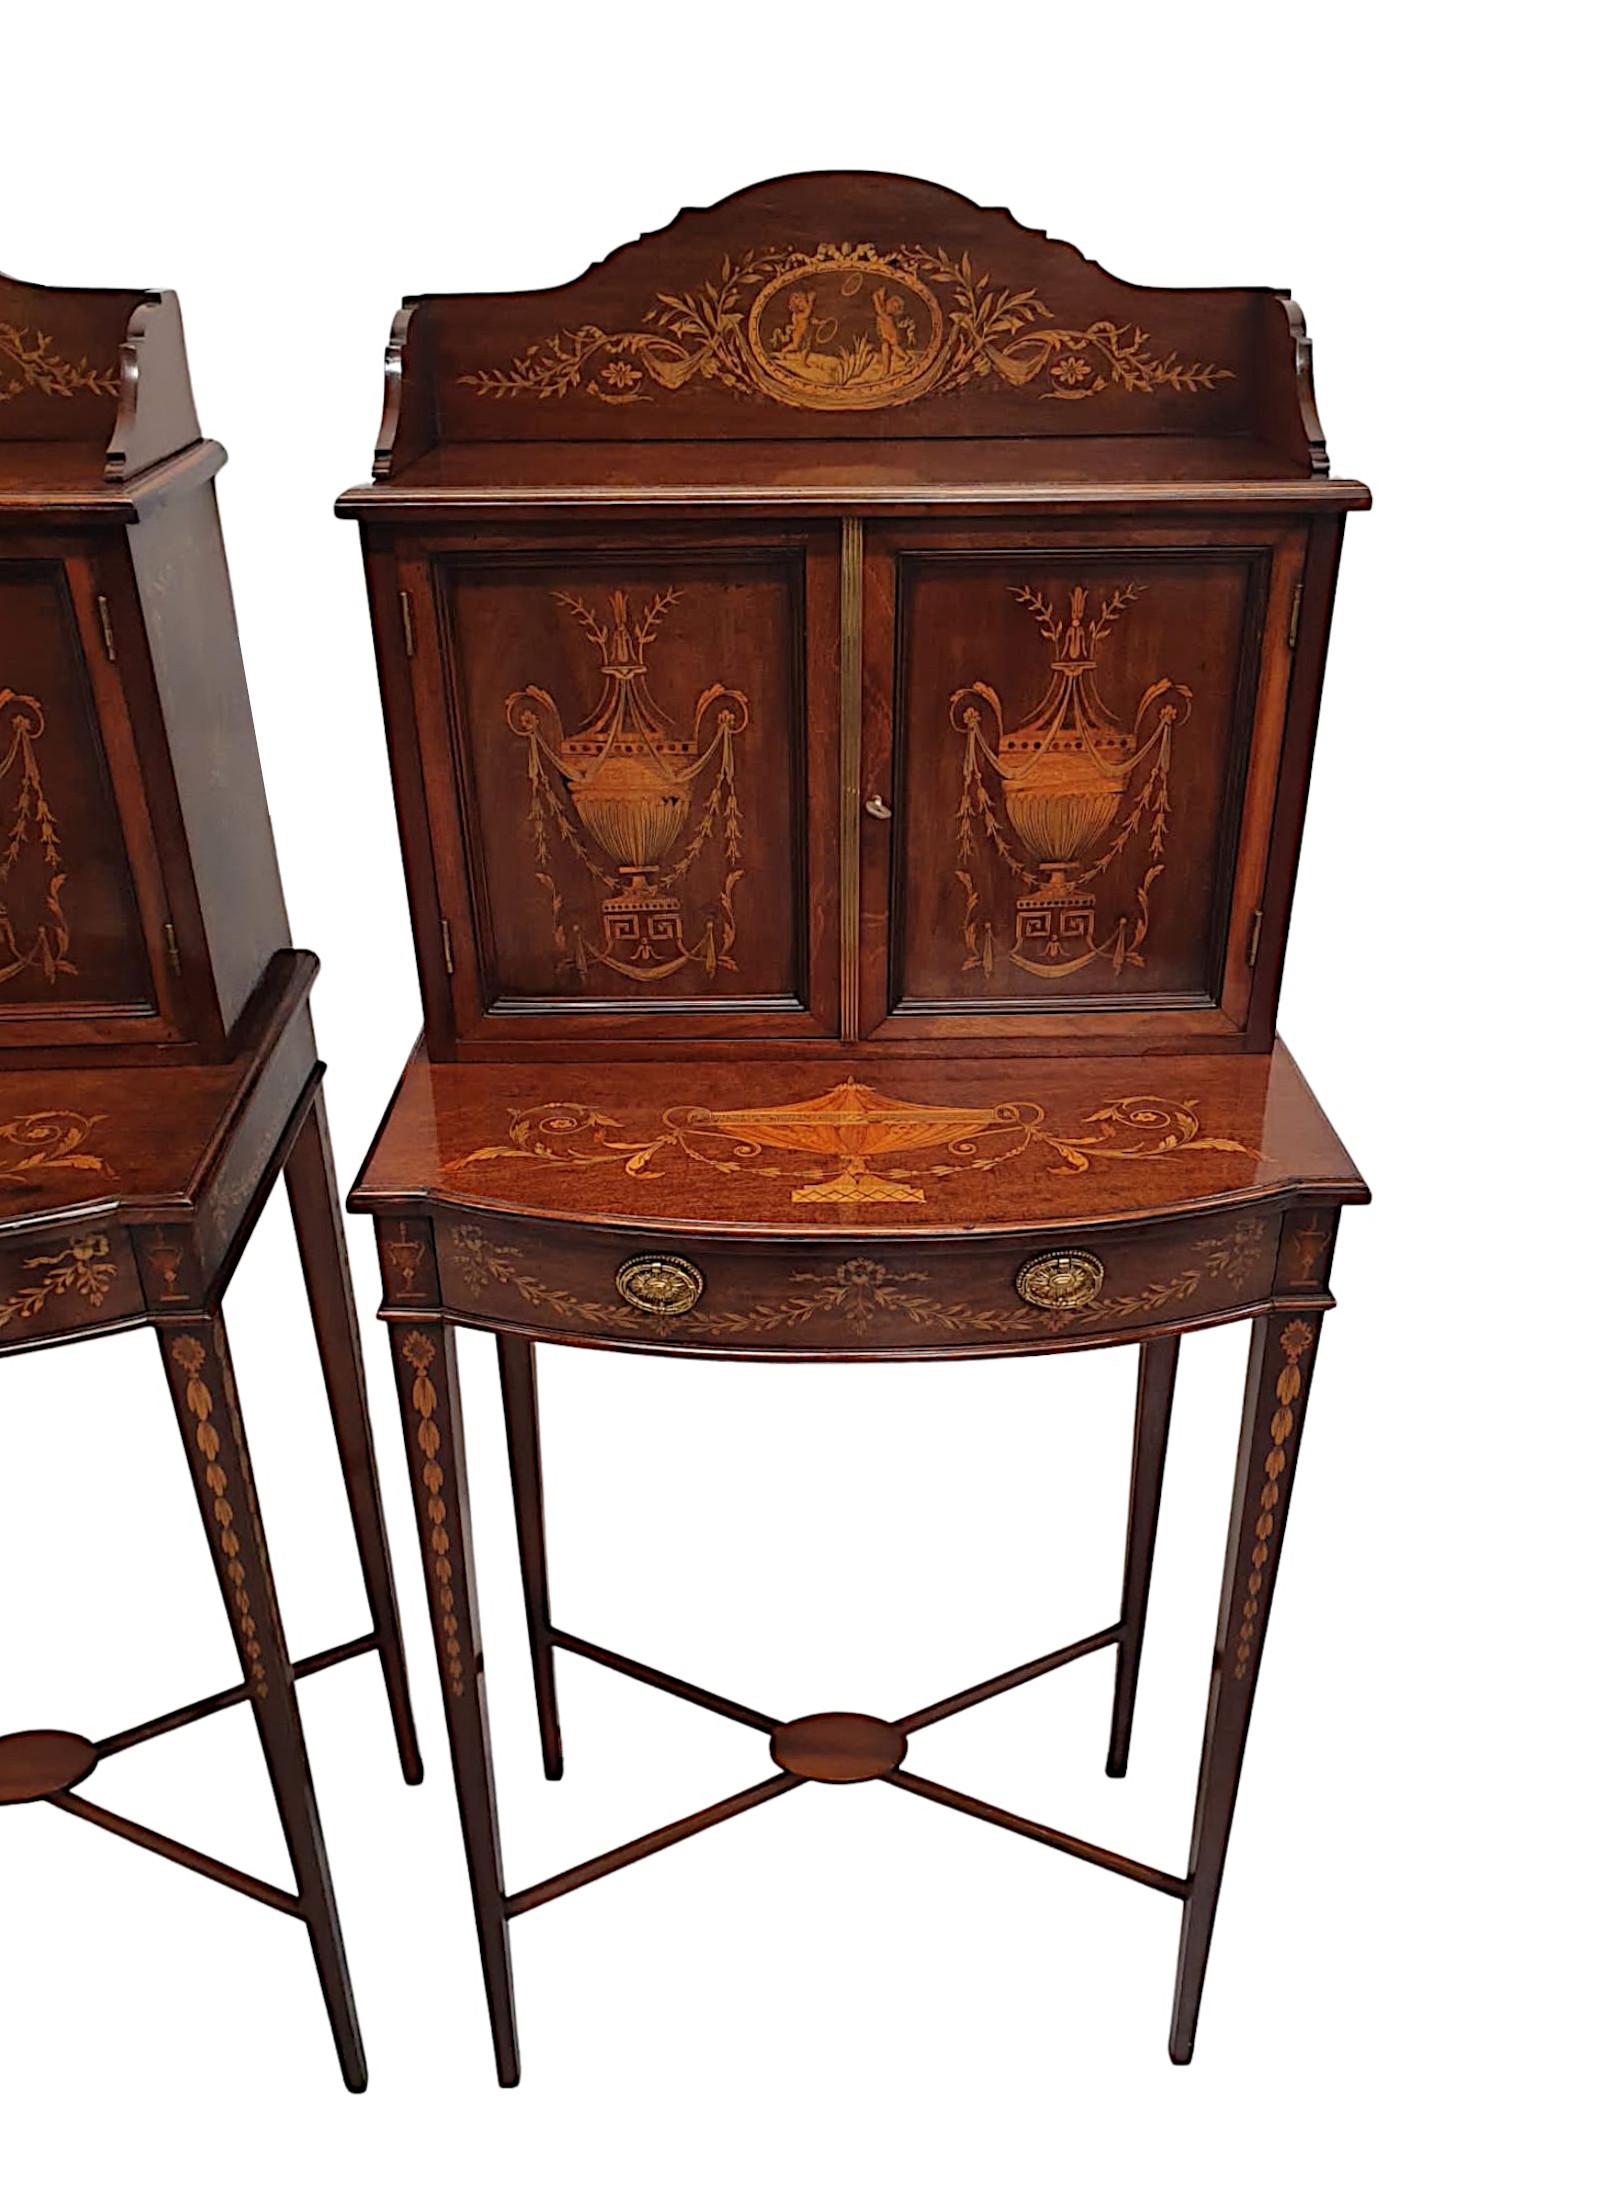 Brass  A Rare Pair of Exceptional Edwardian Cabinets Attributed to Edward and Roberts For Sale